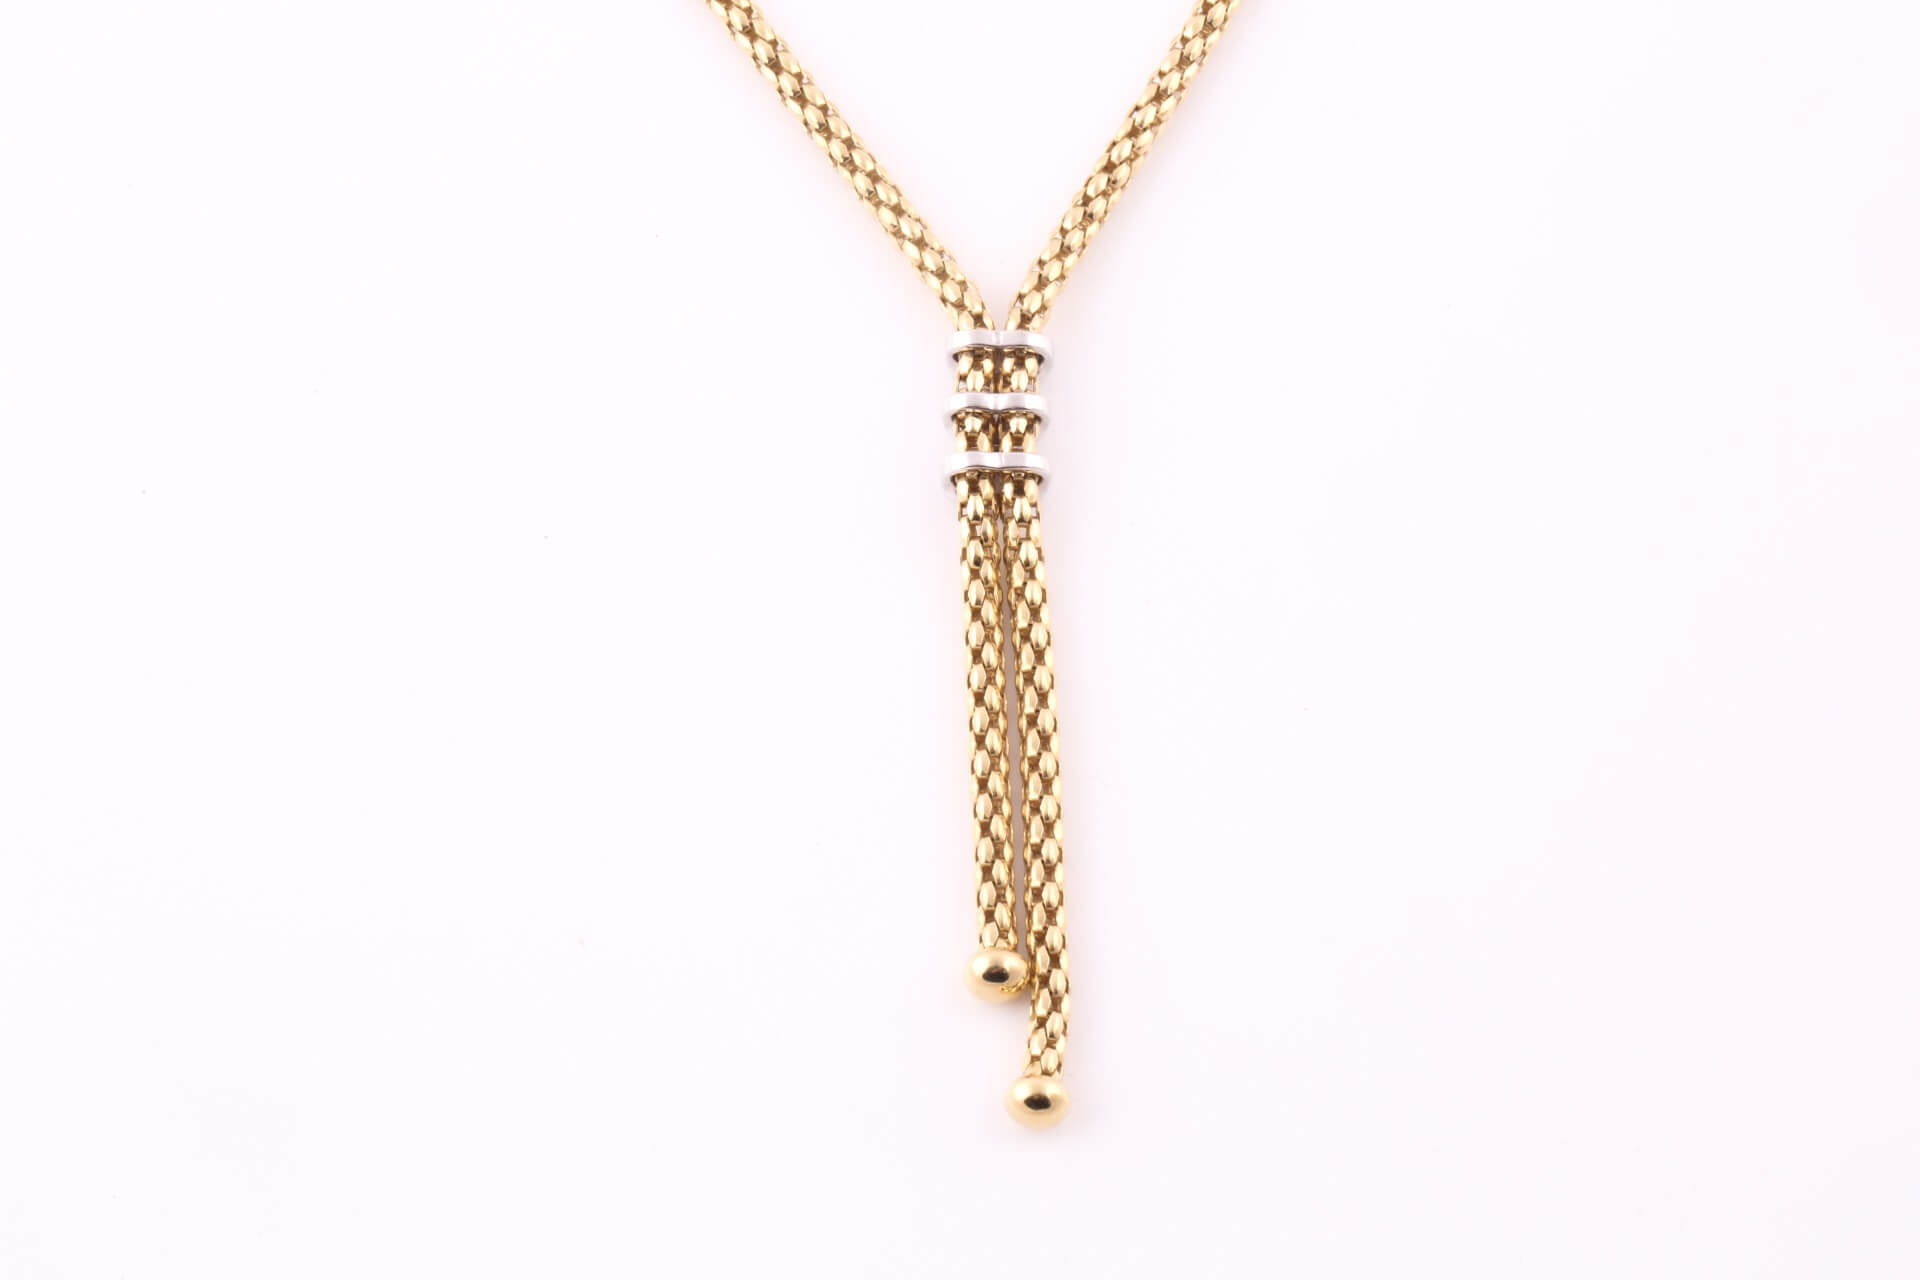 Fope, Italy. An 18ct yellow gold necklace